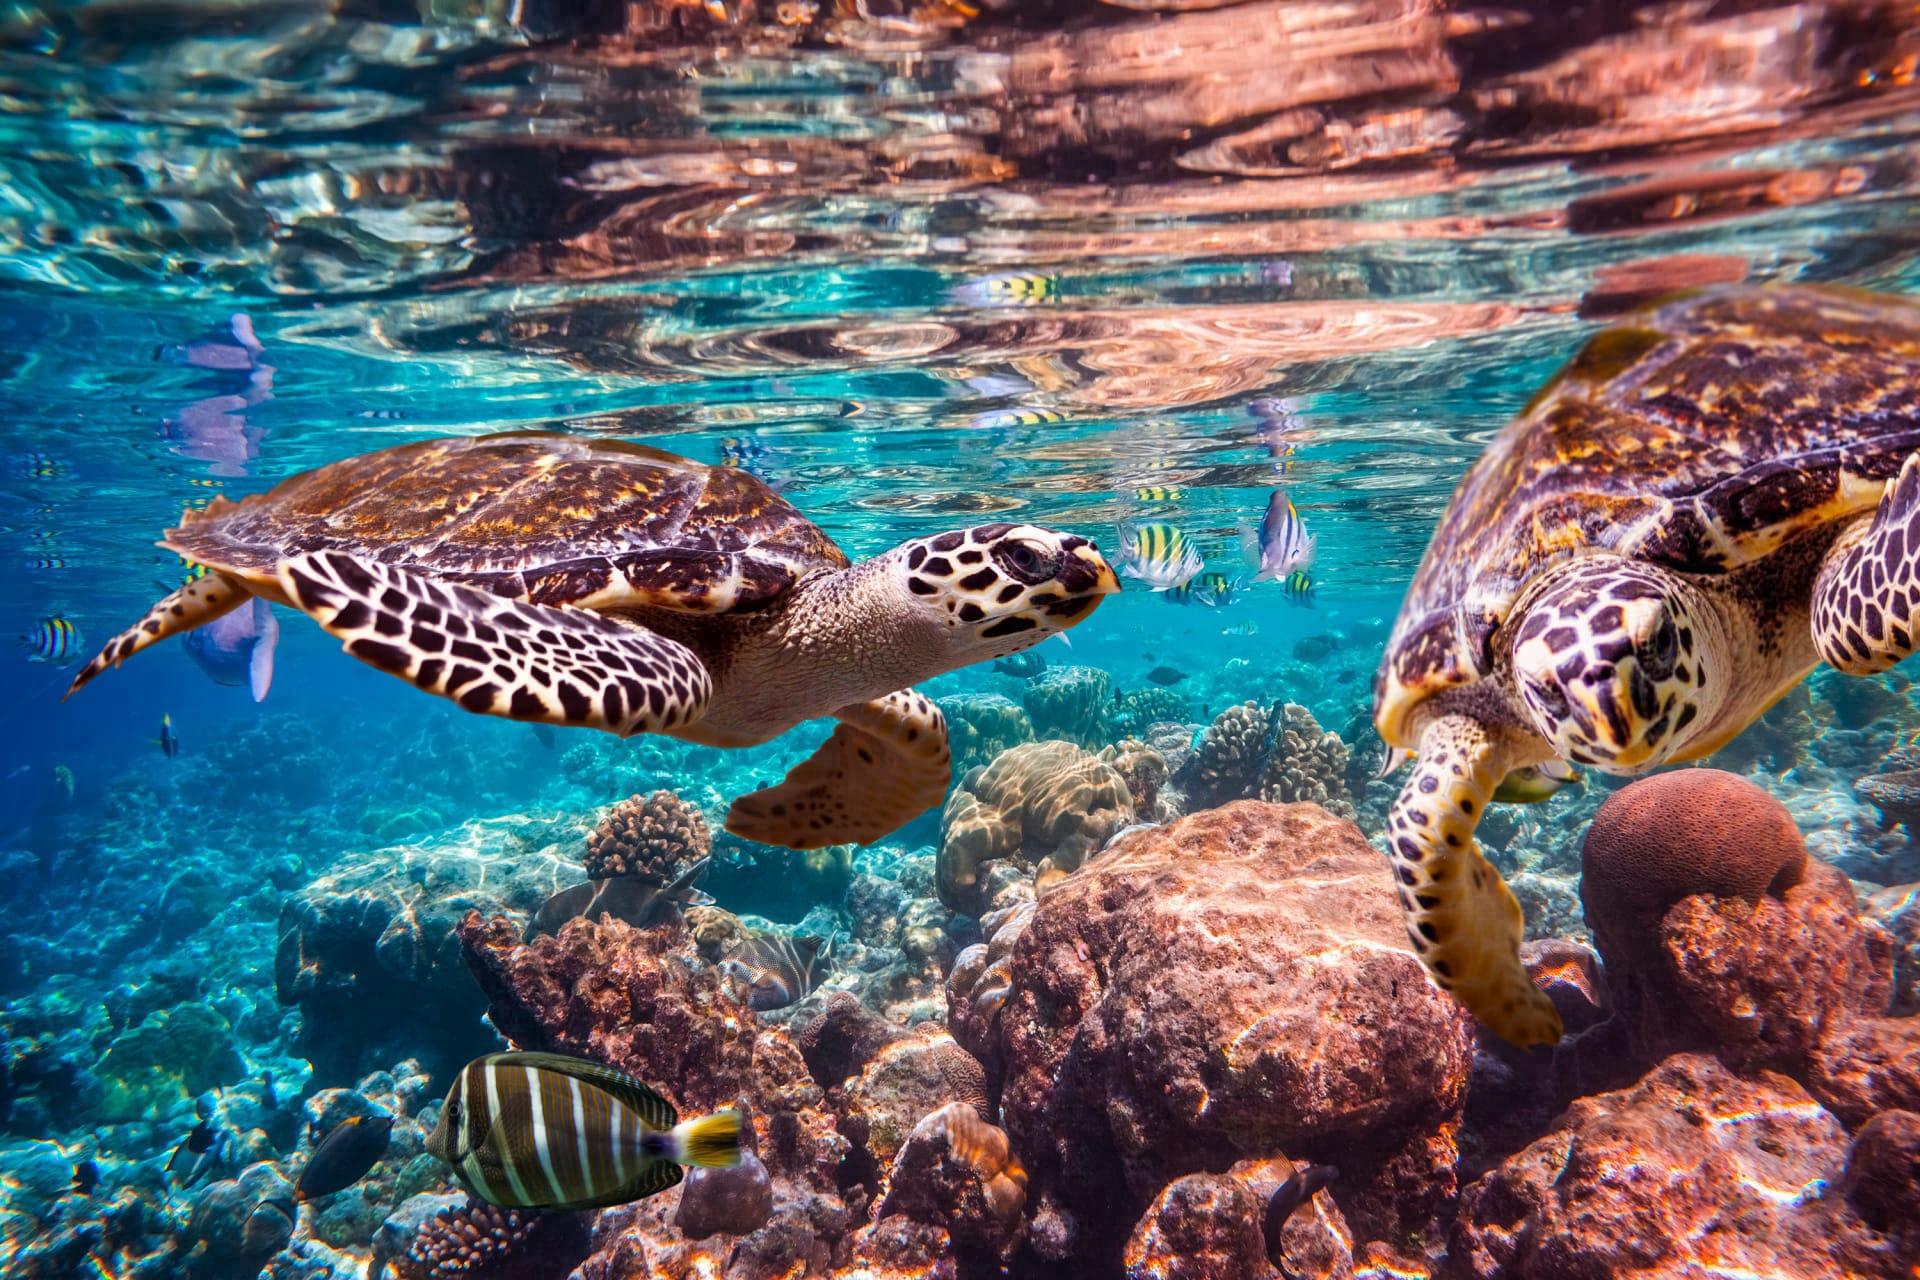 Hawksbill turtle pictures